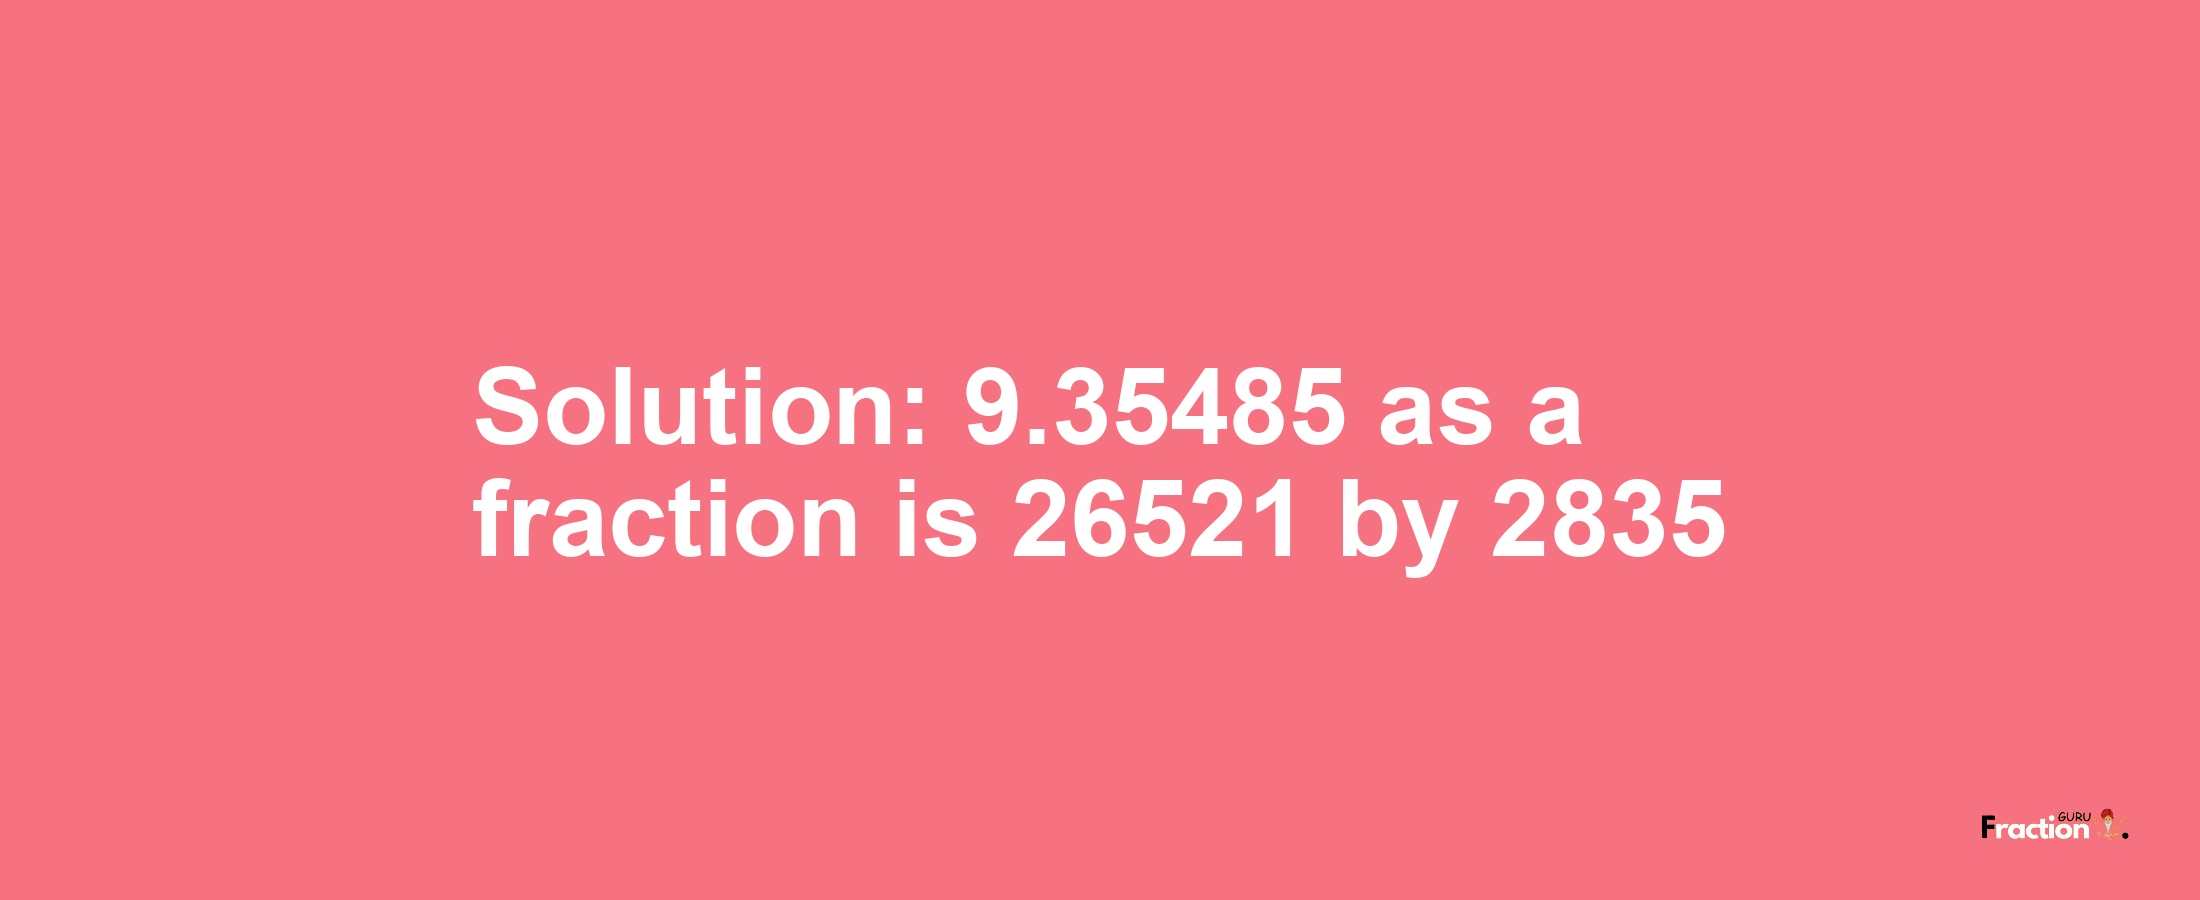 Solution:9.35485 as a fraction is 26521/2835